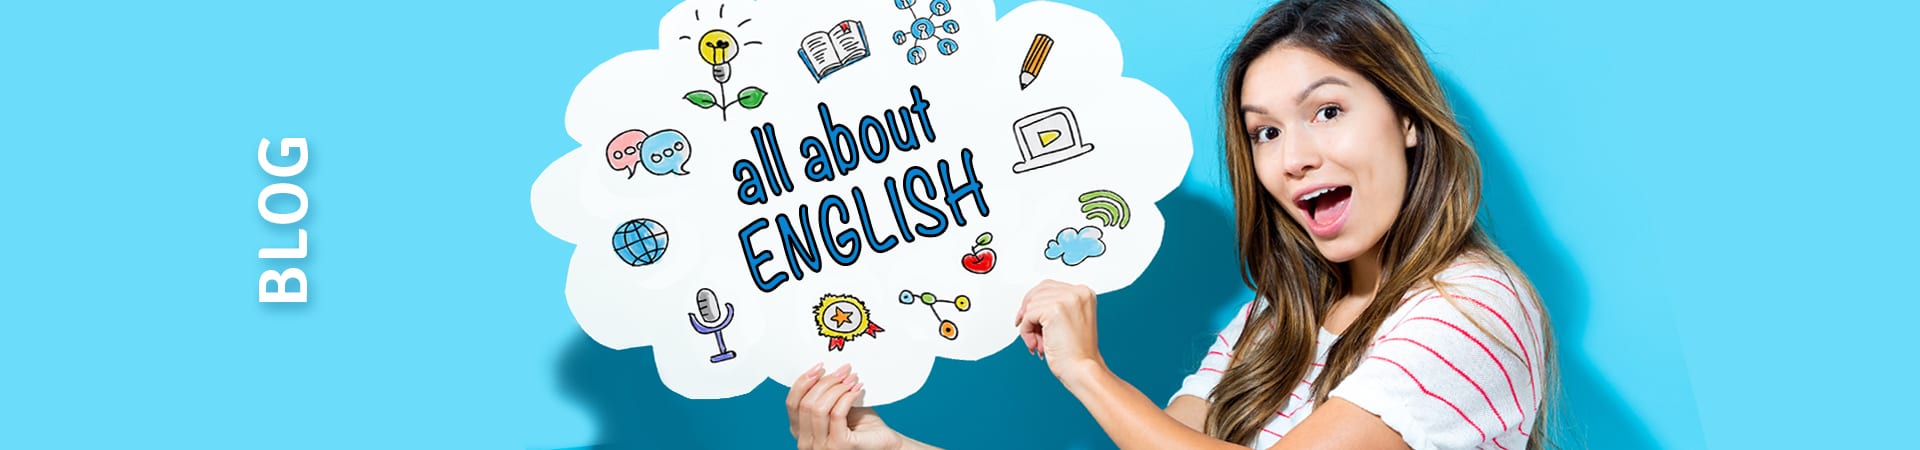 Blog - All About English